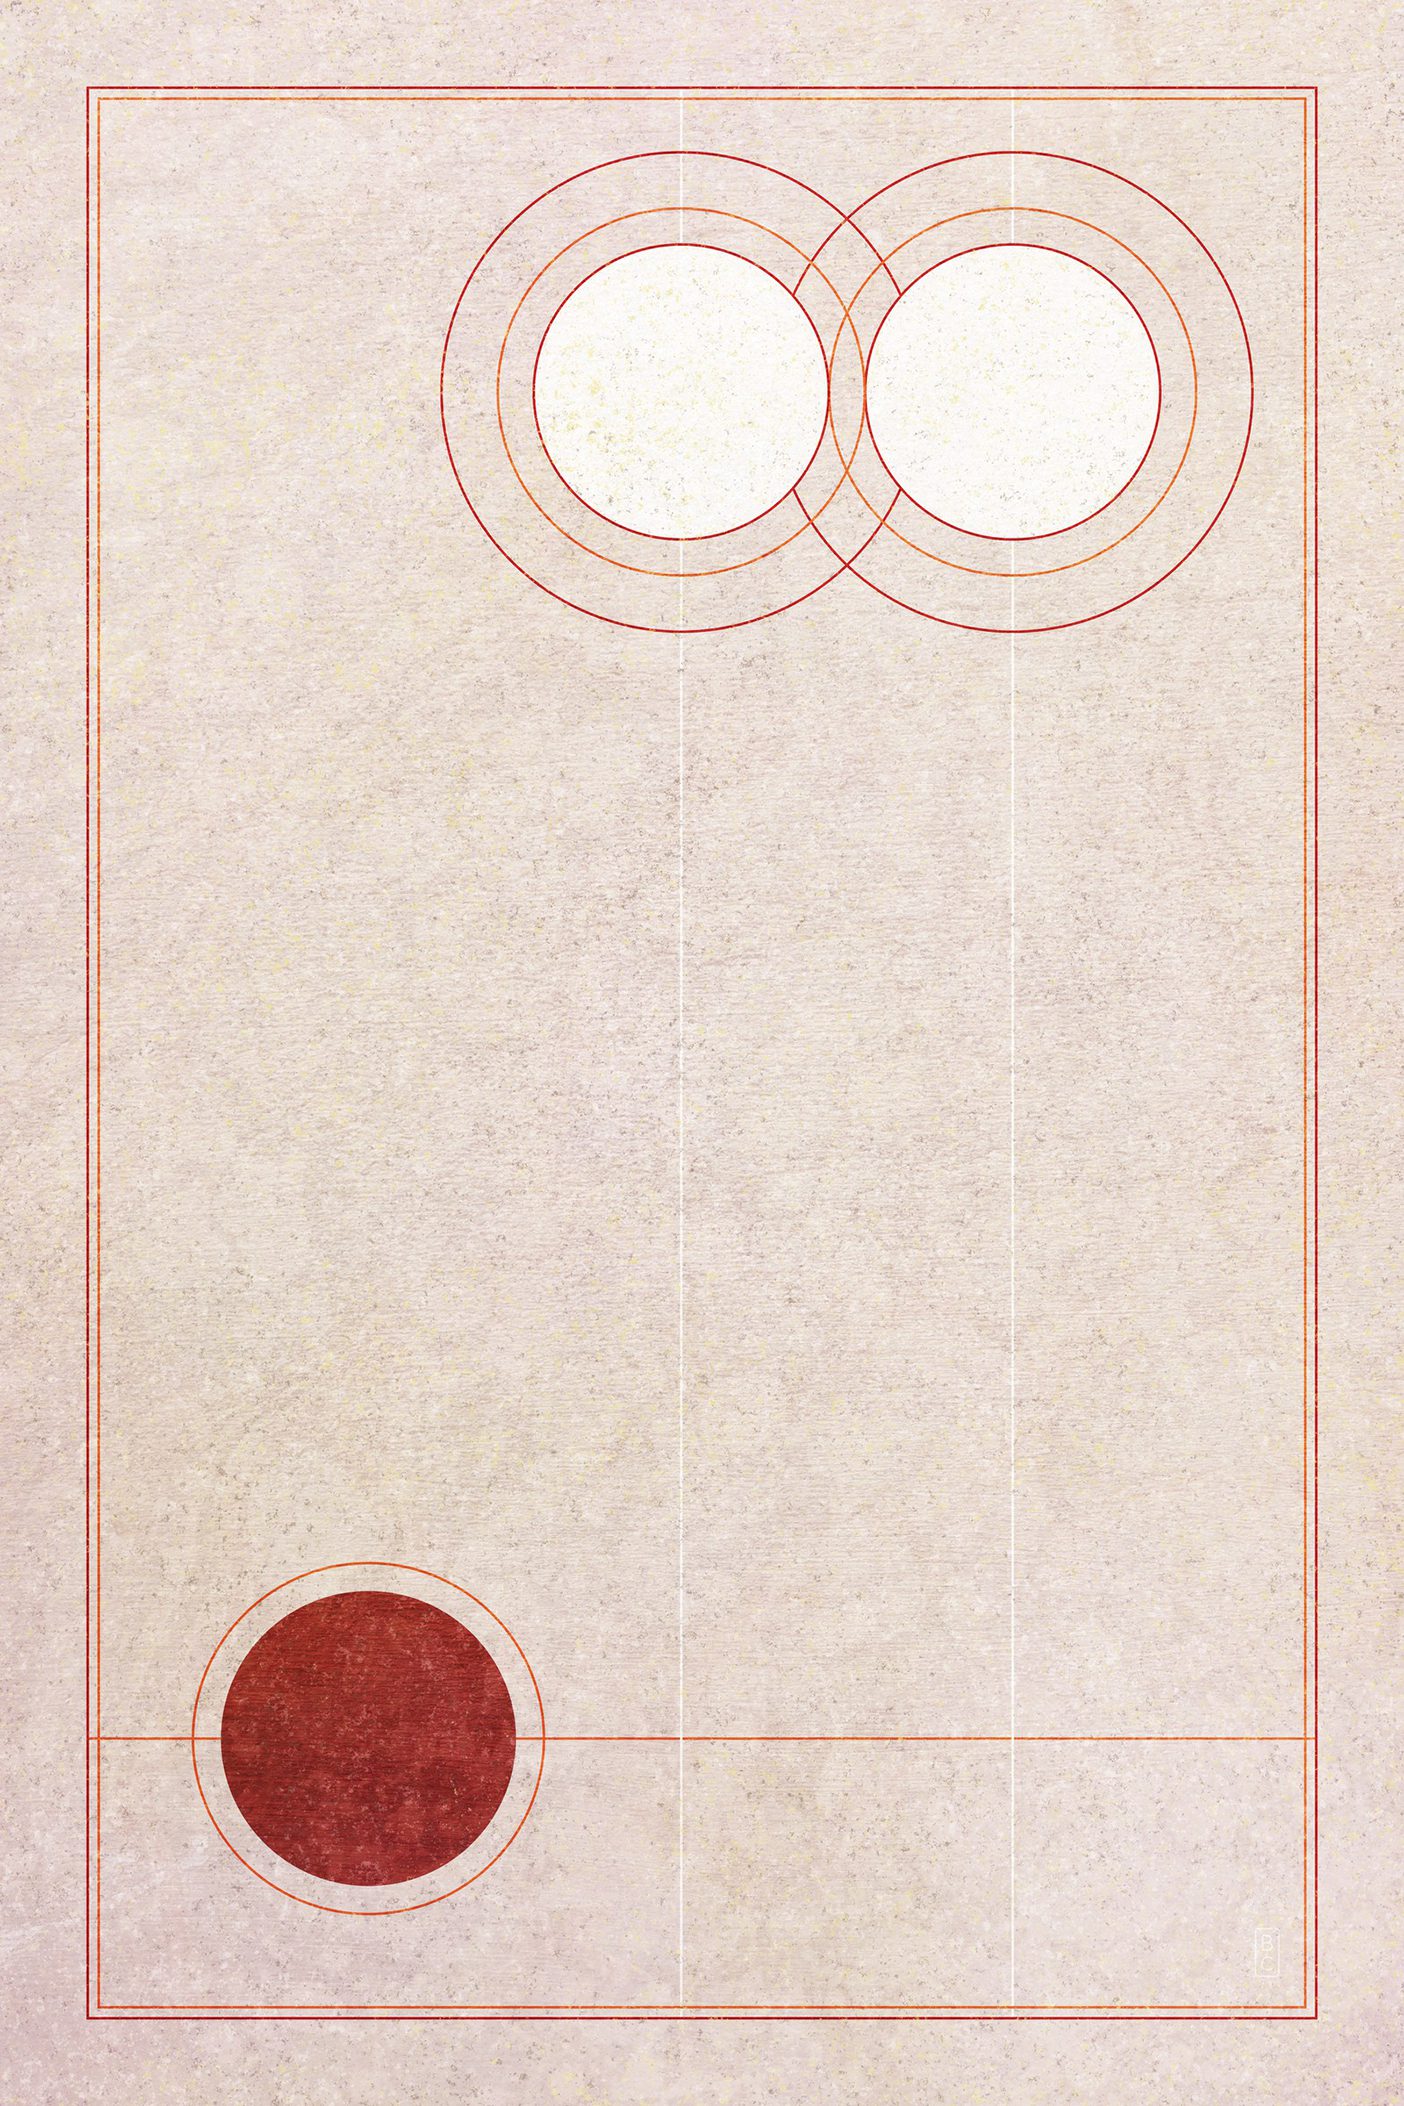 An abstract depiction of the First Vision of Joseph Smith. Smith is represented by a red circle with Heavenly Father and Jesus Christ above him, represented by two white circles.